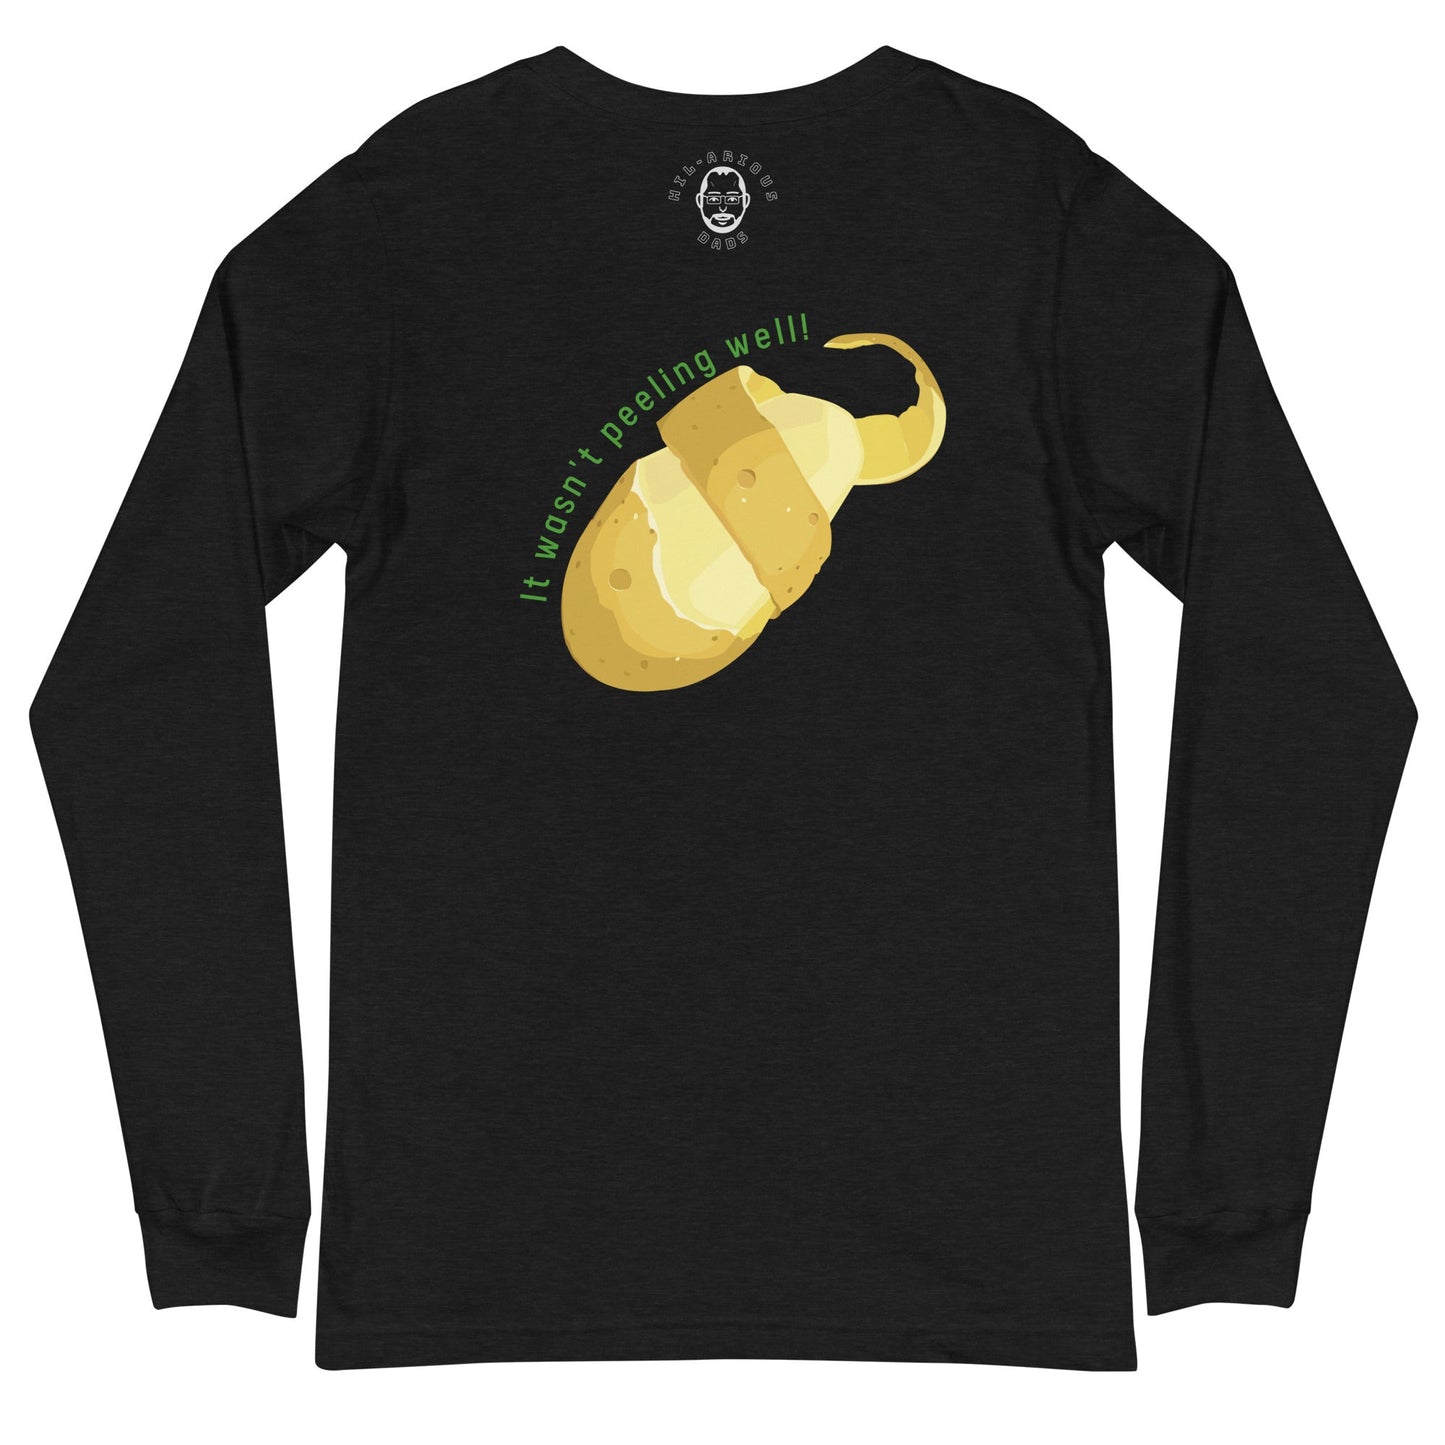 Why did the Irish potato go to the doctor?-Long Sleeve Tee - Hil-arious Dads